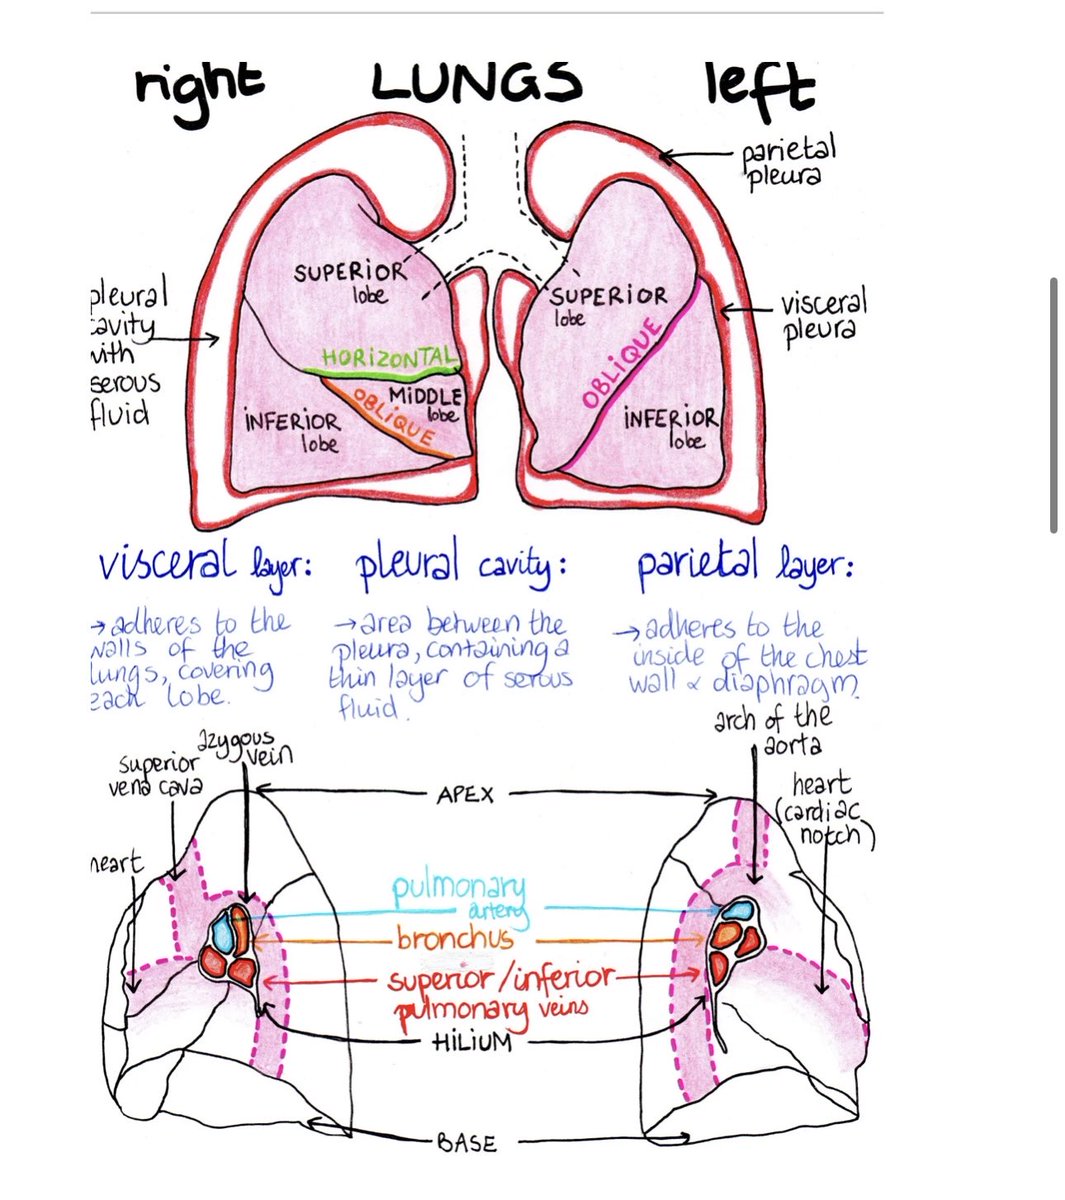 Lung anatomy by paus